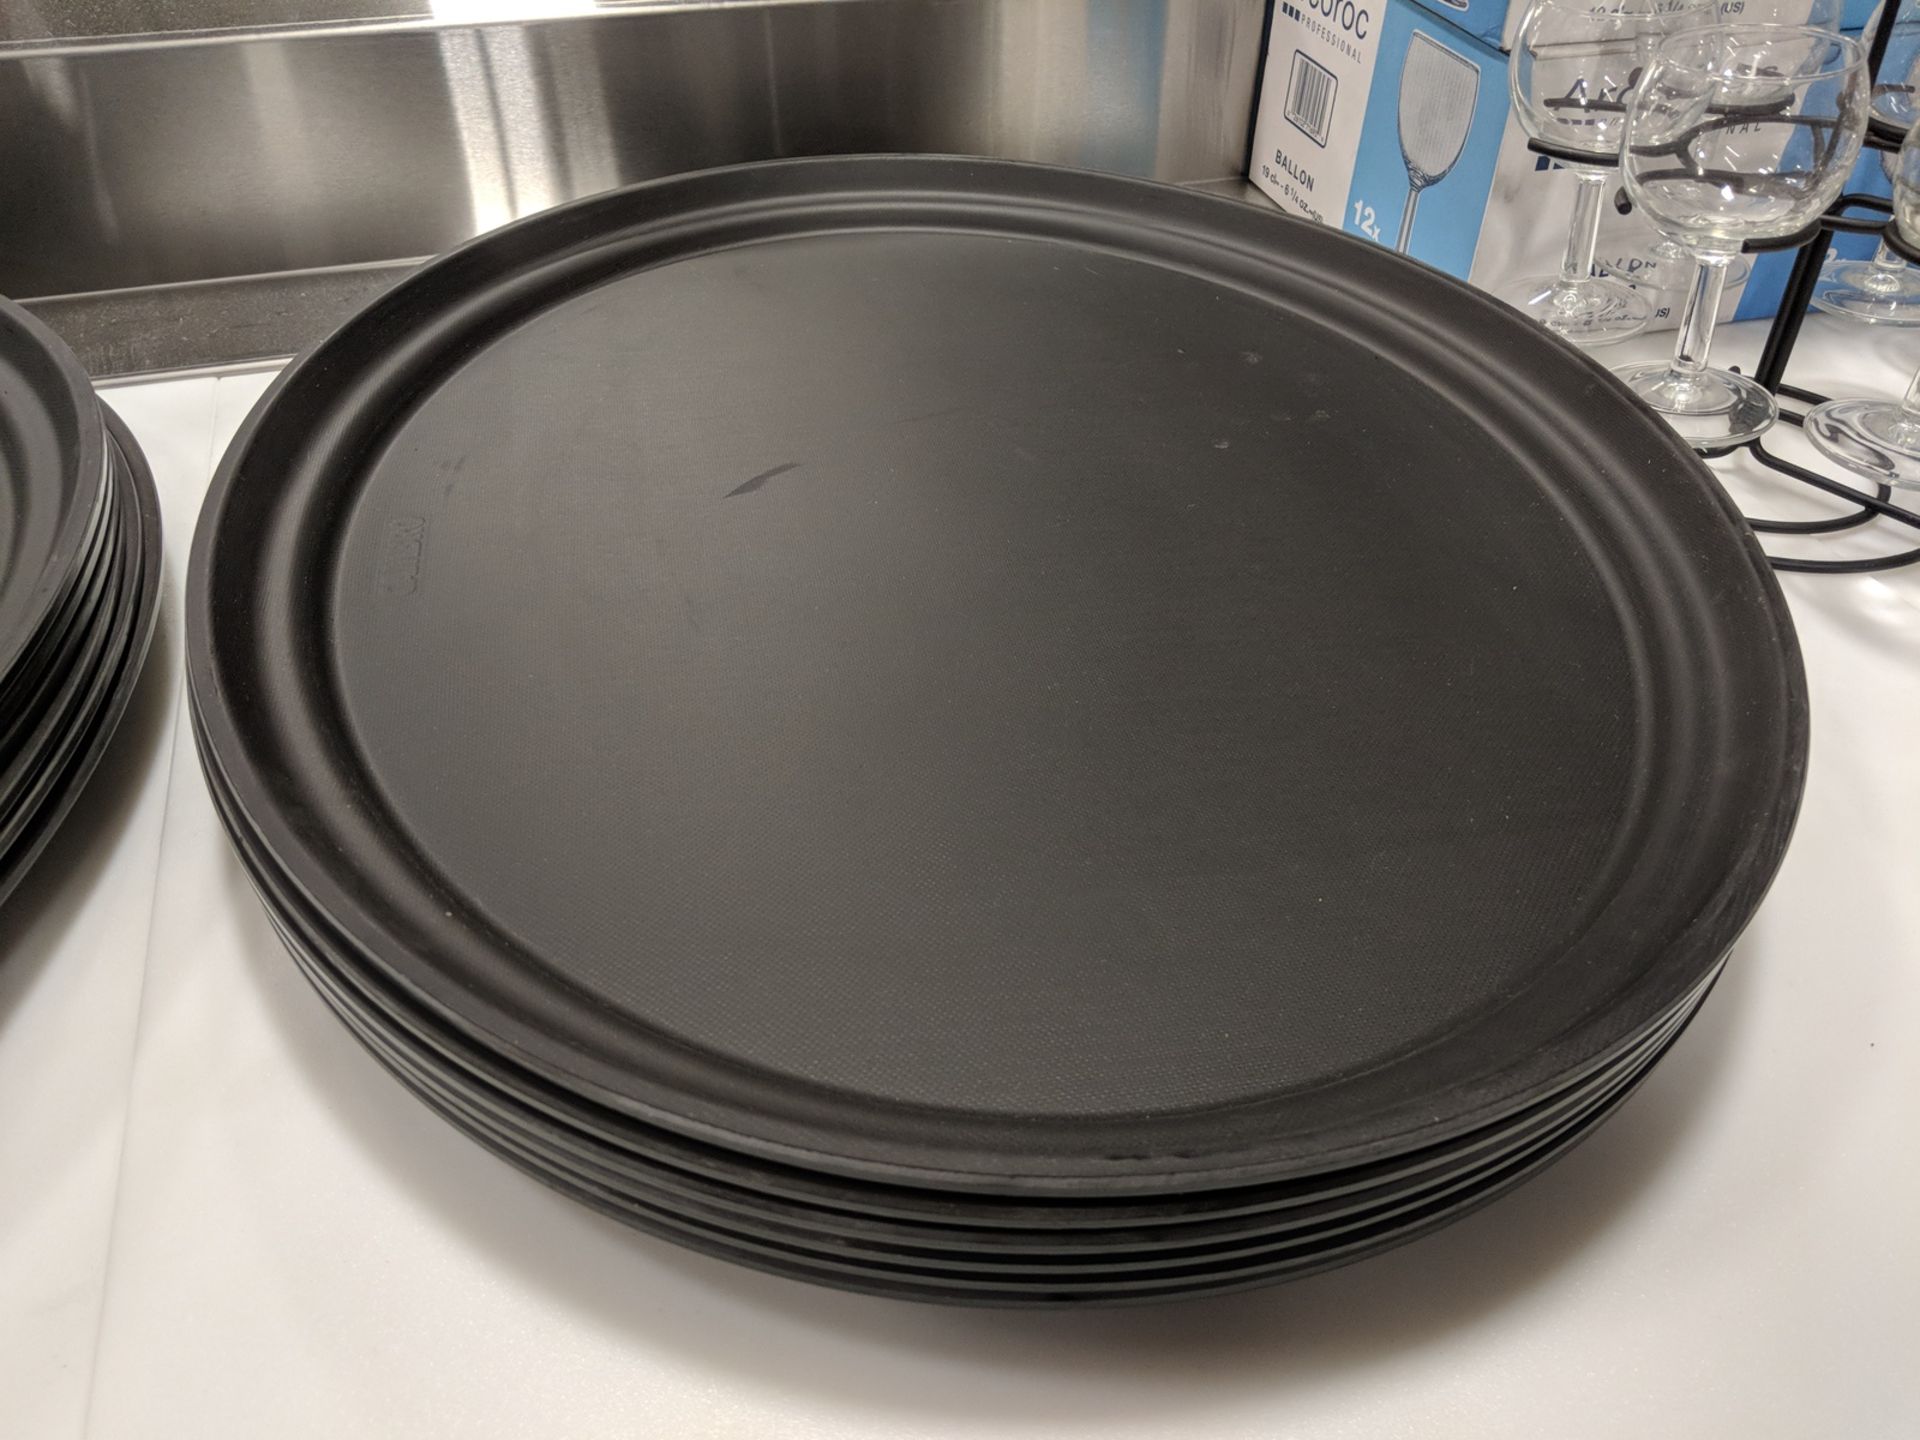 19" x 23" Oval Camtread Serving Trays, Cambro 2500CT110 - Lot of 6 - Image 2 of 2